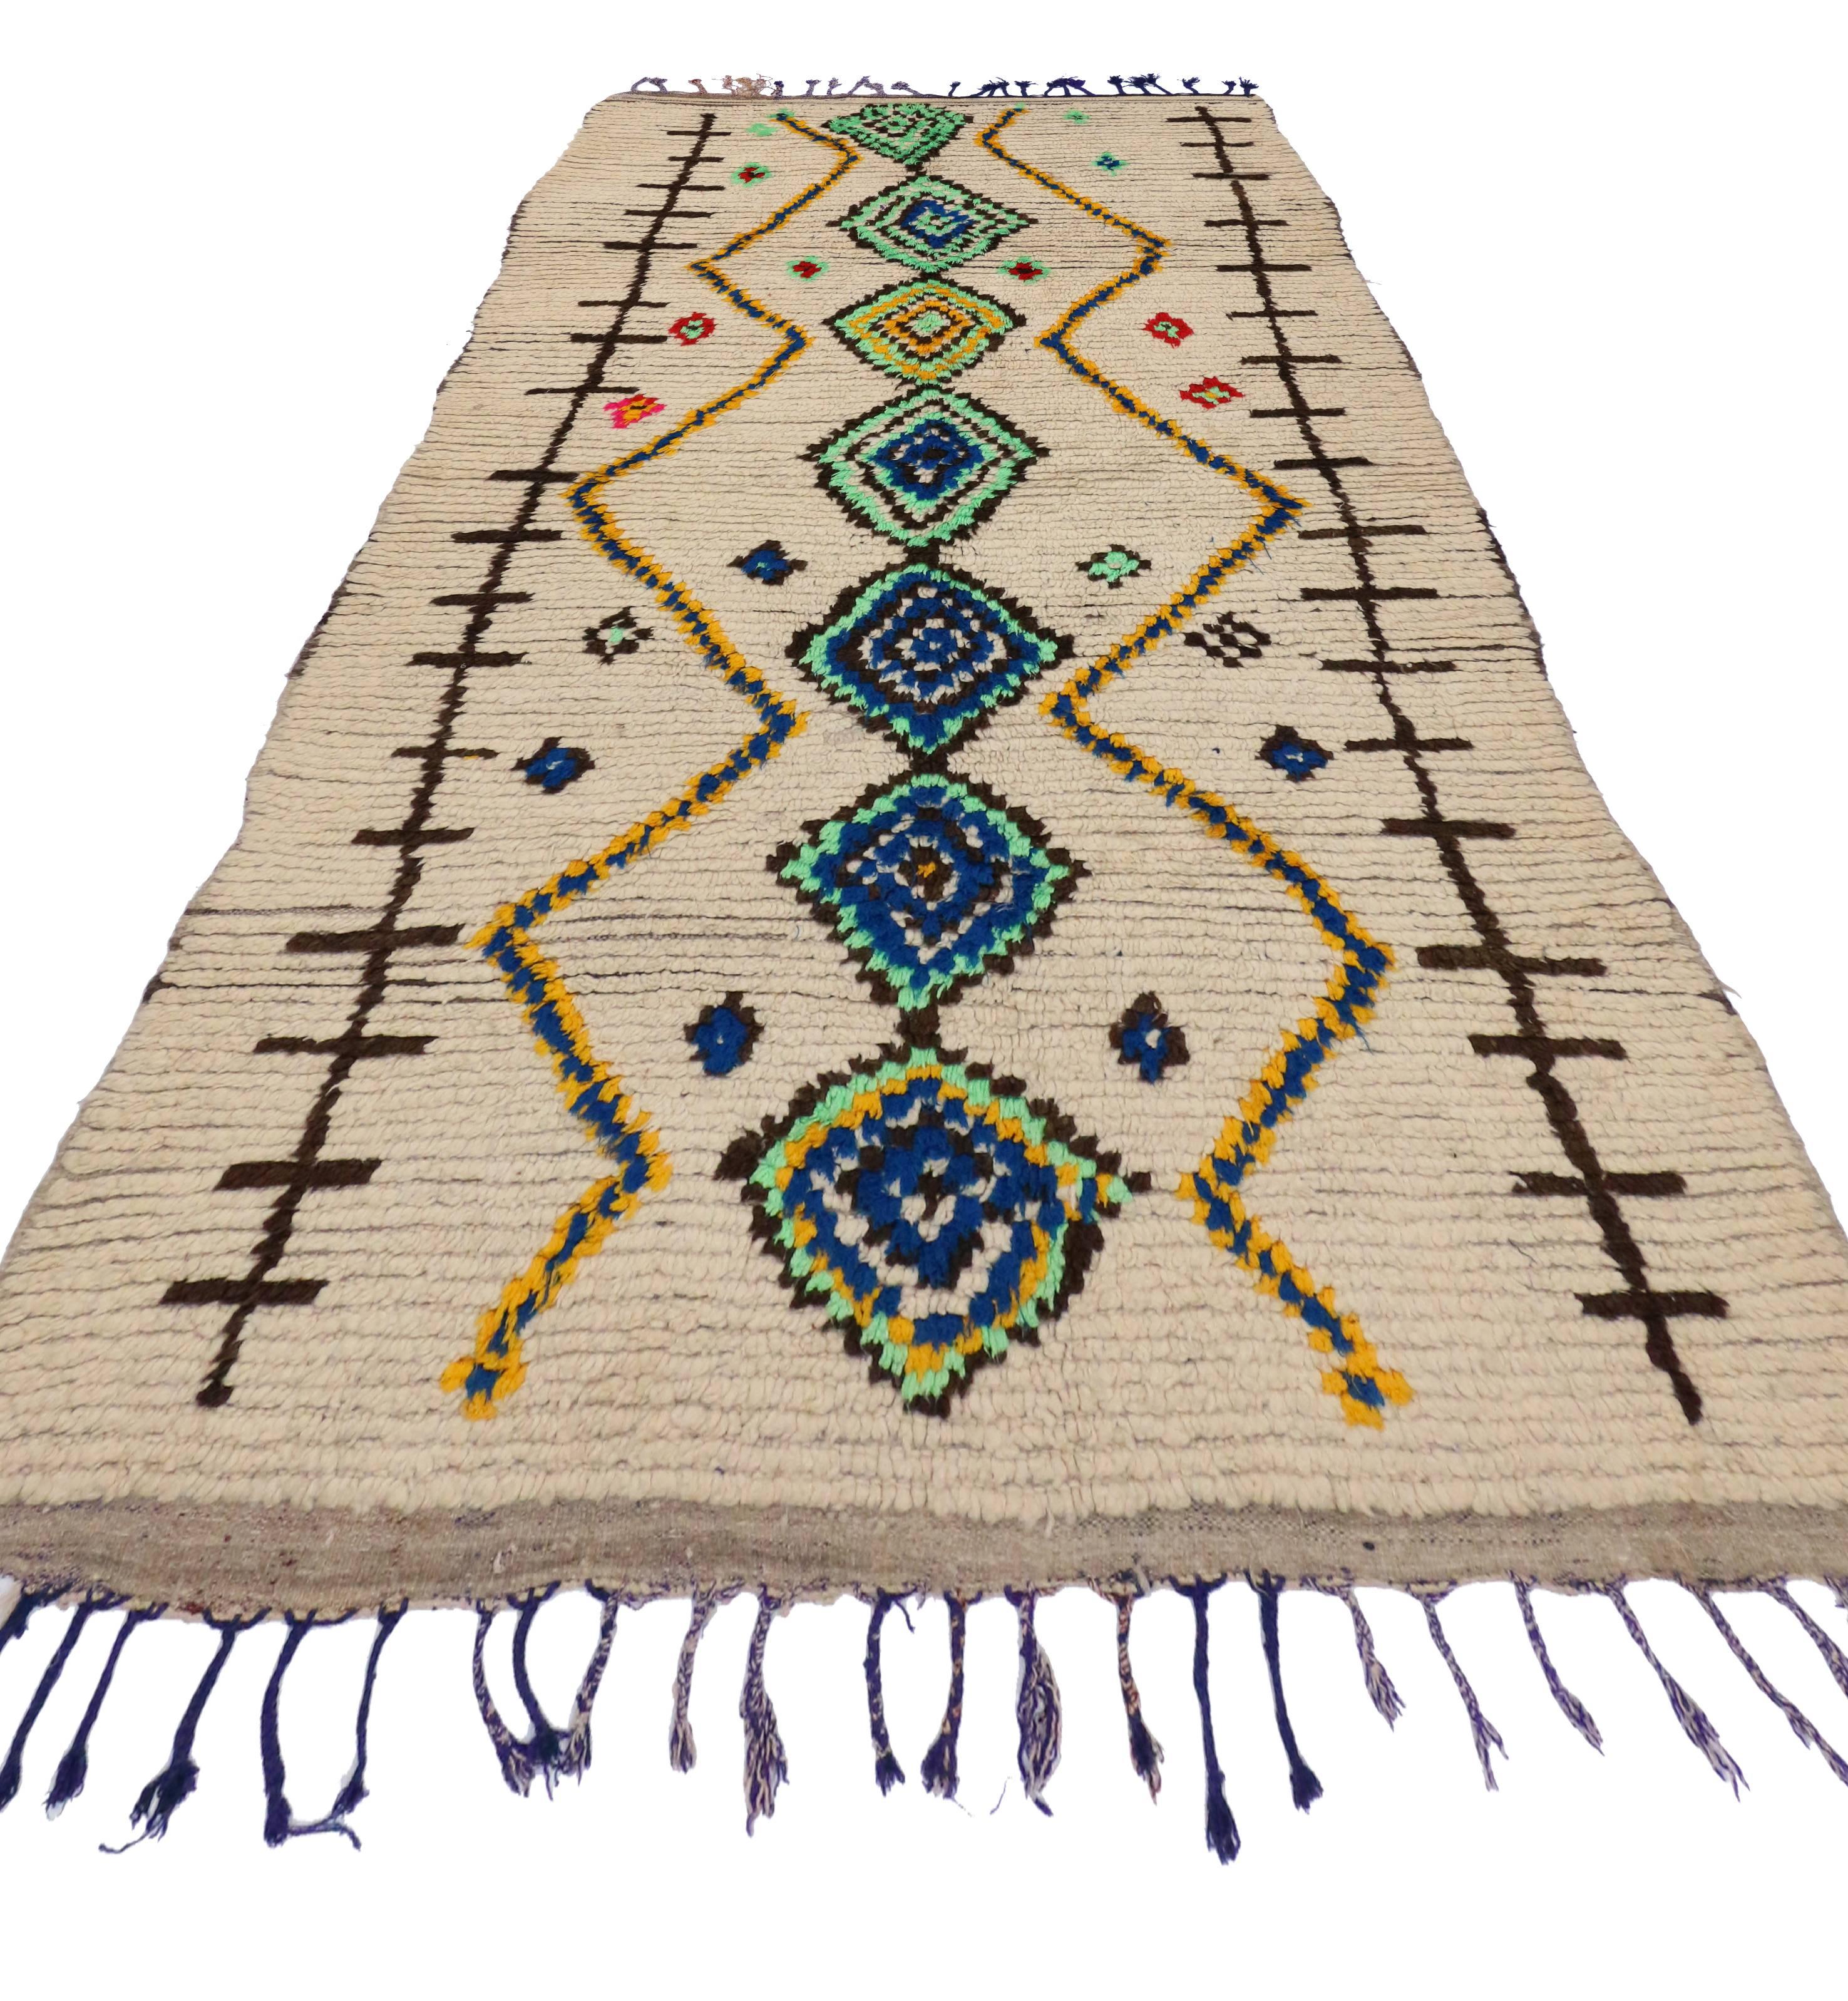 Hand-Knotted Mid-Century Modern Style Berber Moroccan Rug with Tribal Design